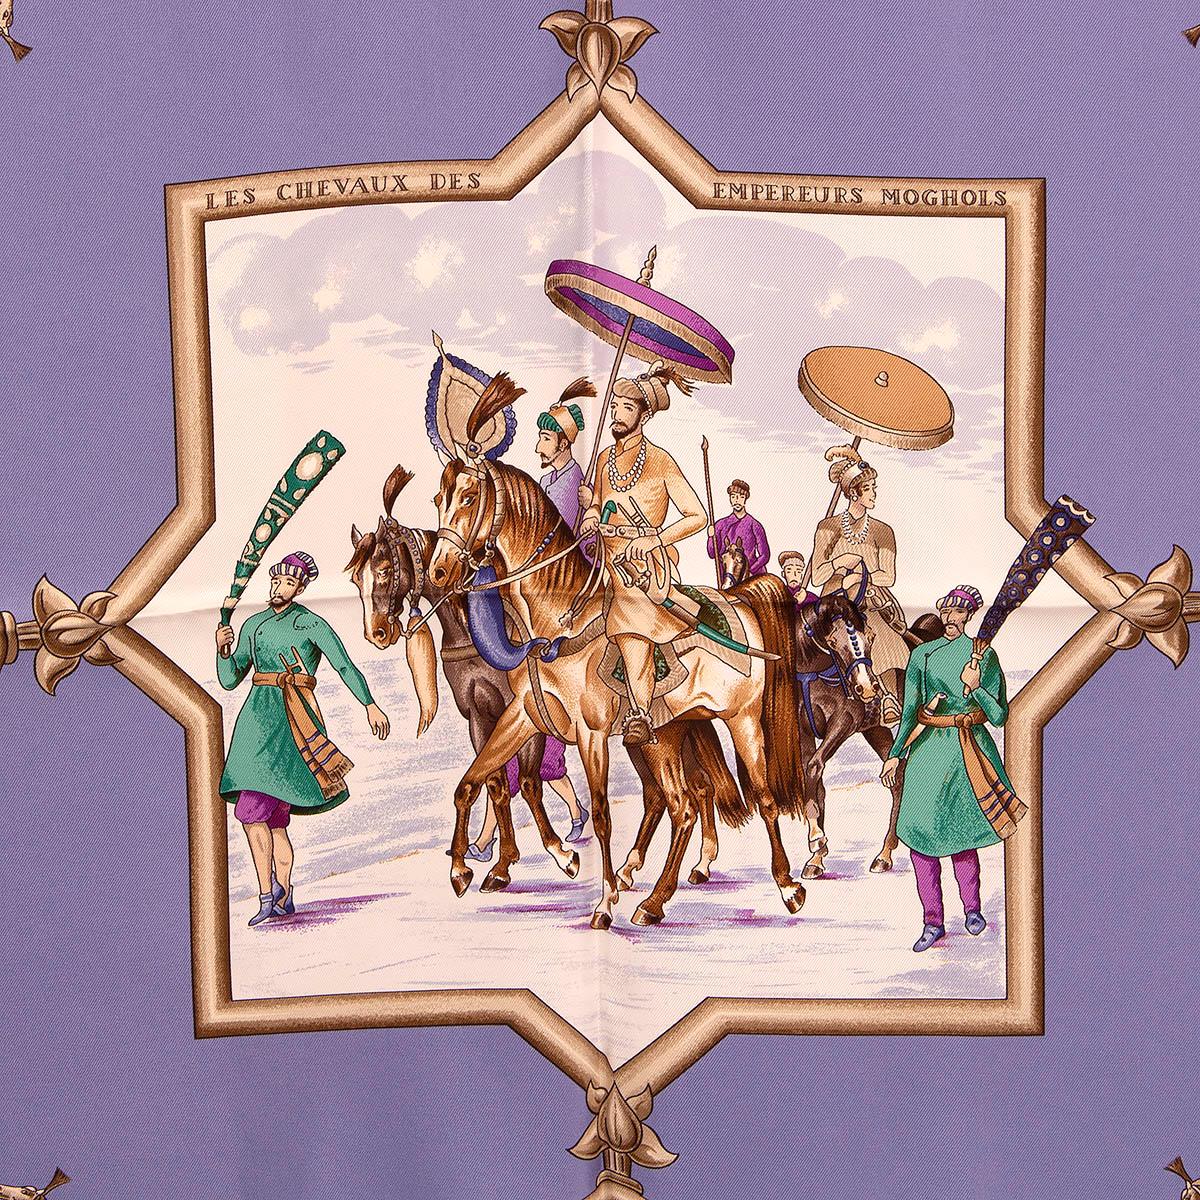 100% authentic Hermés 'Les Cheveaux des Empereurs Moghols 90' scarf by Jean de Fougerolle in lavender silk twill (100%) with details in beige, purple, green and brown. Has been worn and is in excellent condition.

Measurements
Width	90cm